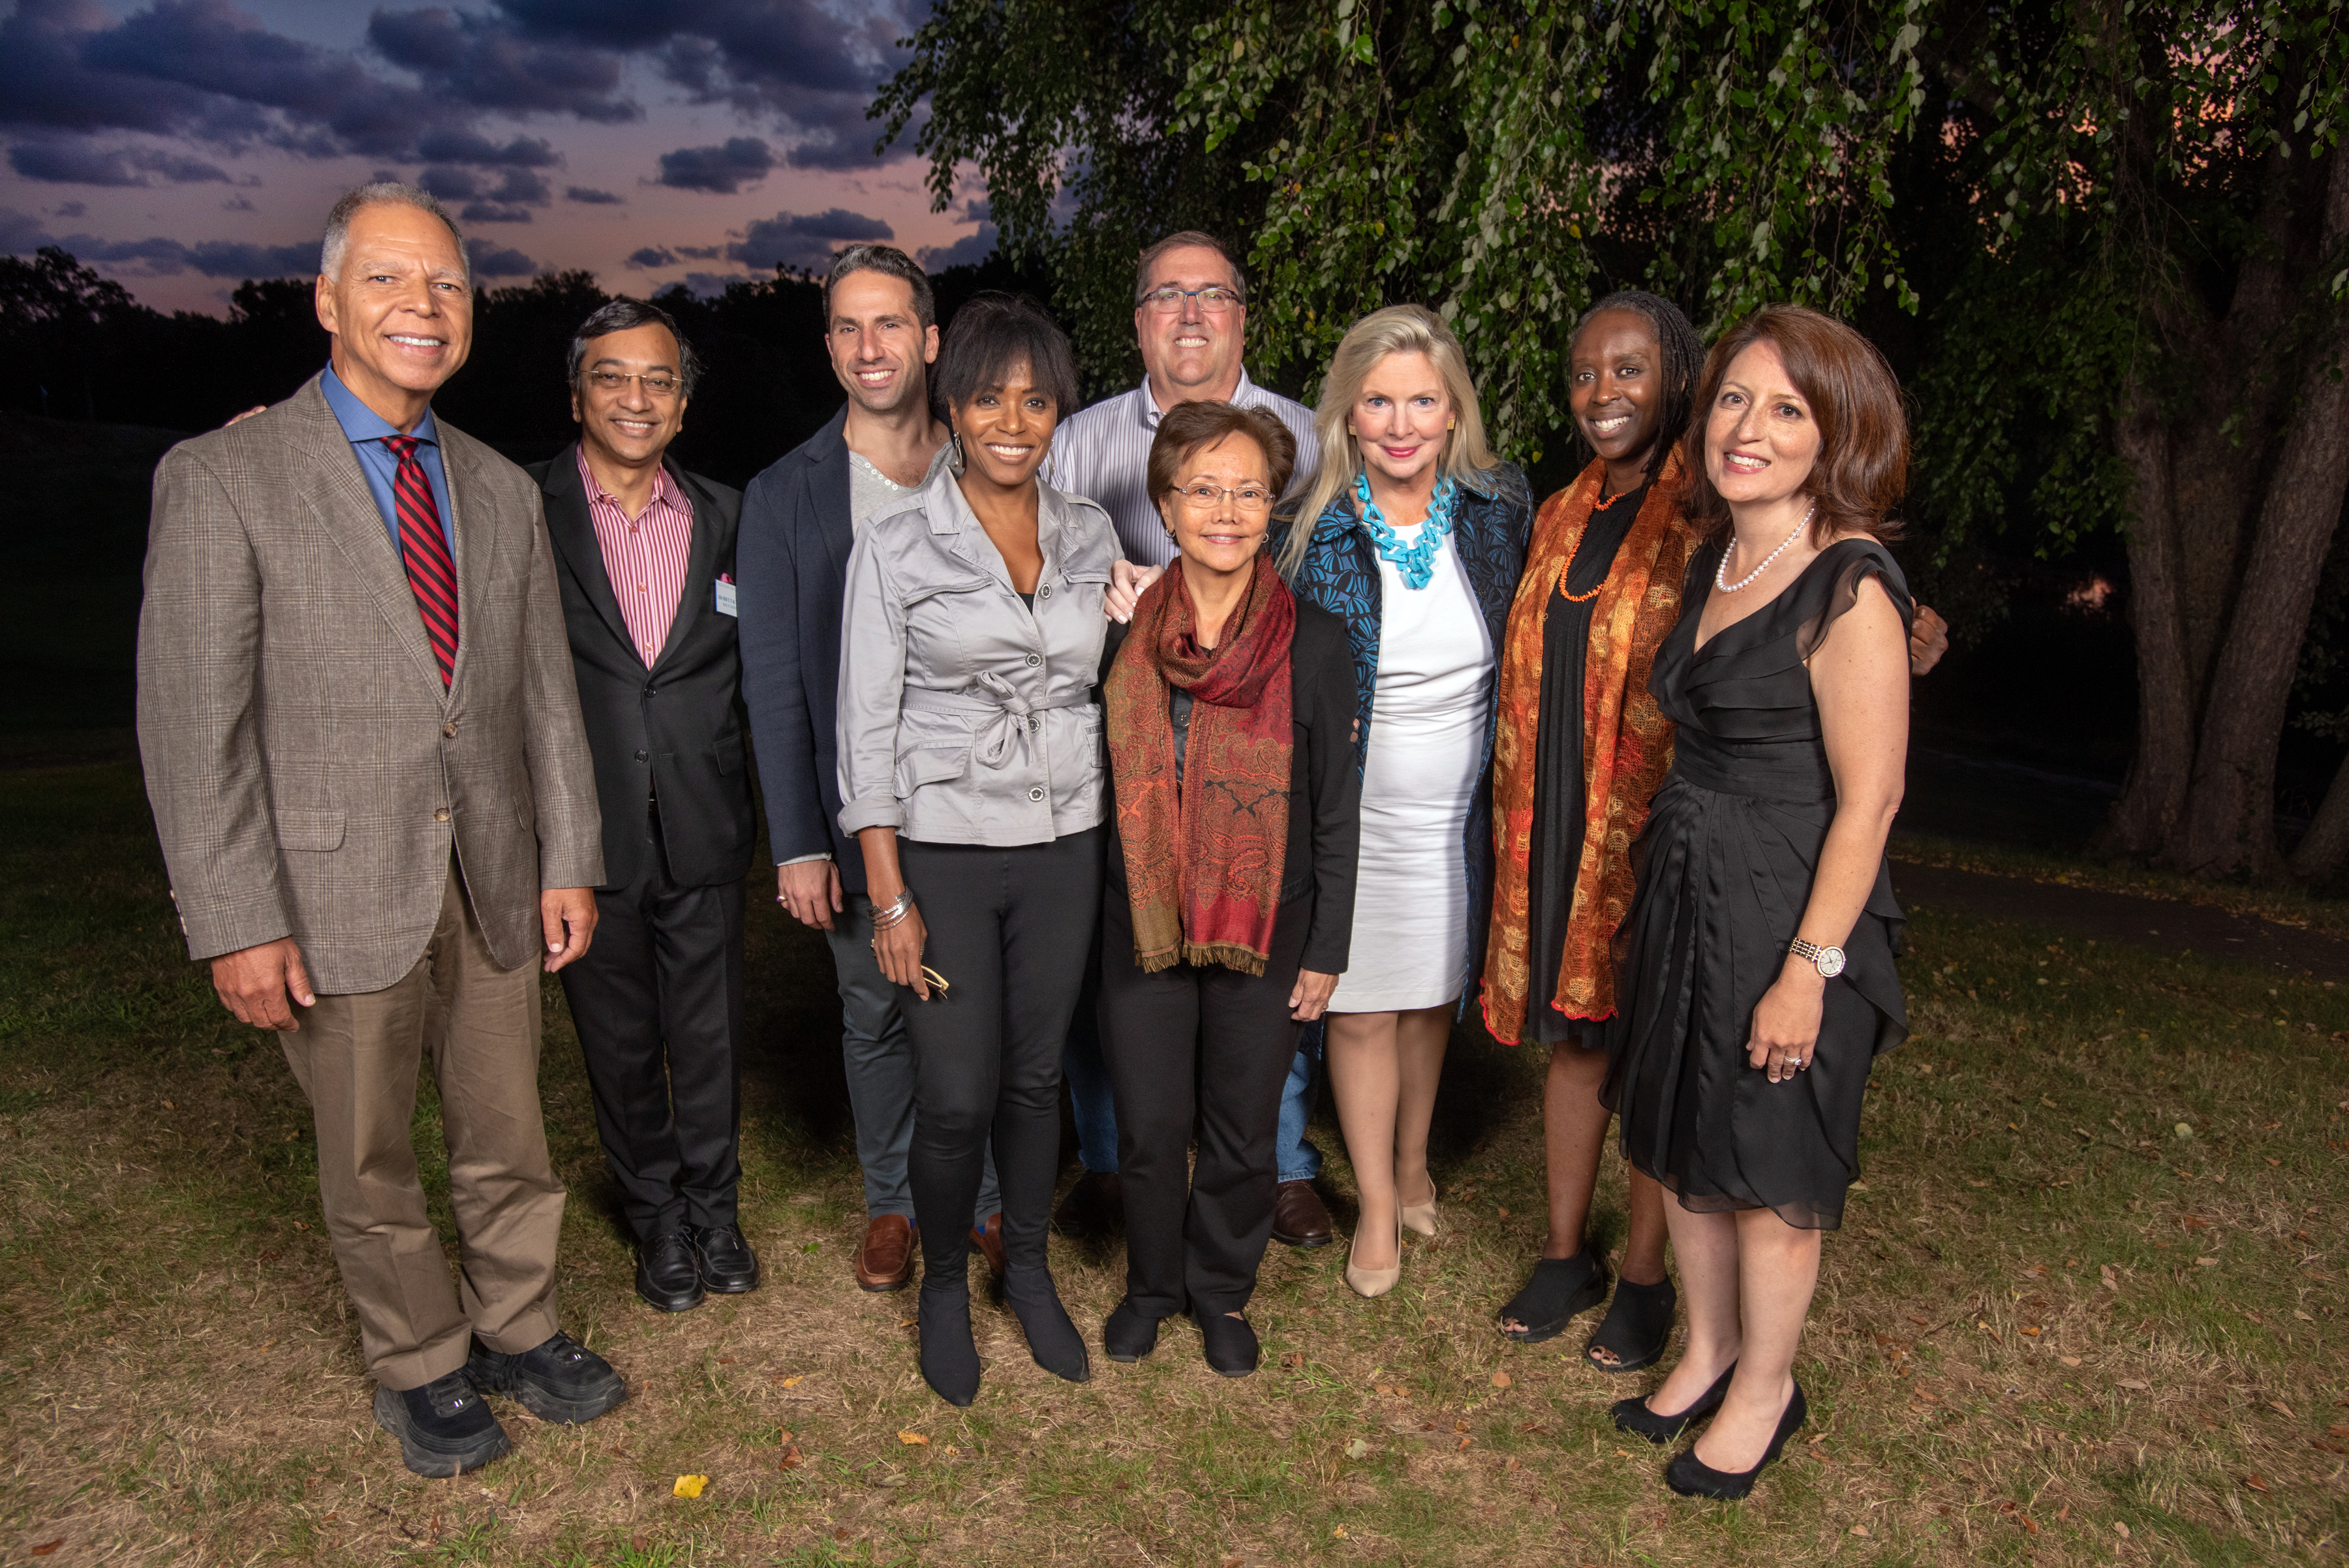 New executive committee members Paul Bosco ’84 MS (center, back row) and Jennifer Madar ’88 and Wendy Maldonado D’Amico ’93 (far right) with the members of their board class in a photo taken in Fall 2019.